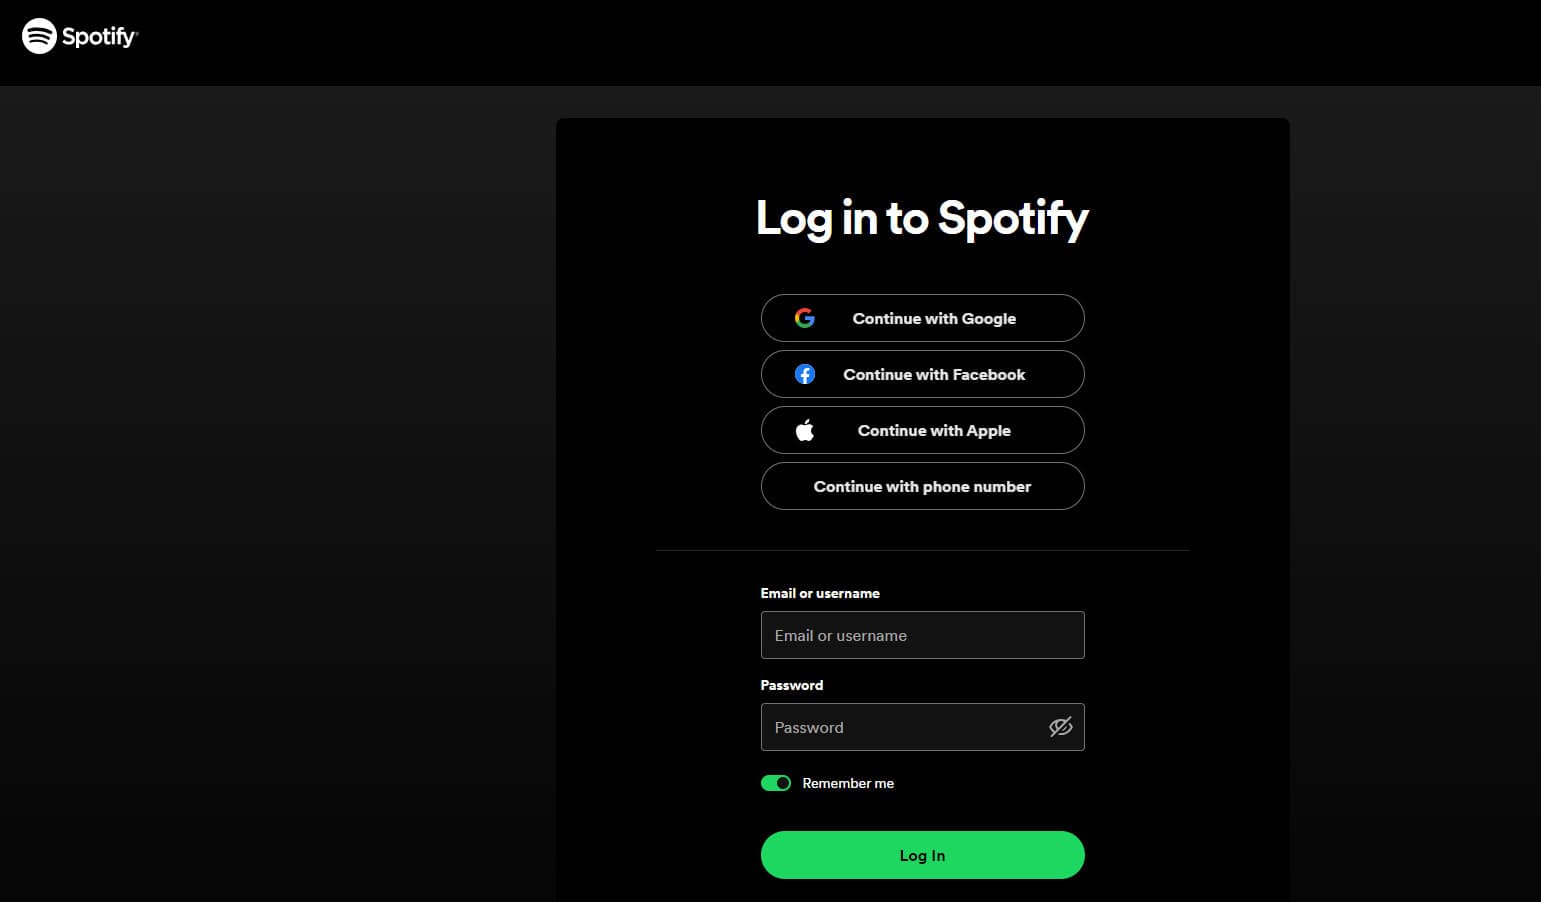 Log out of Spotify and log back in